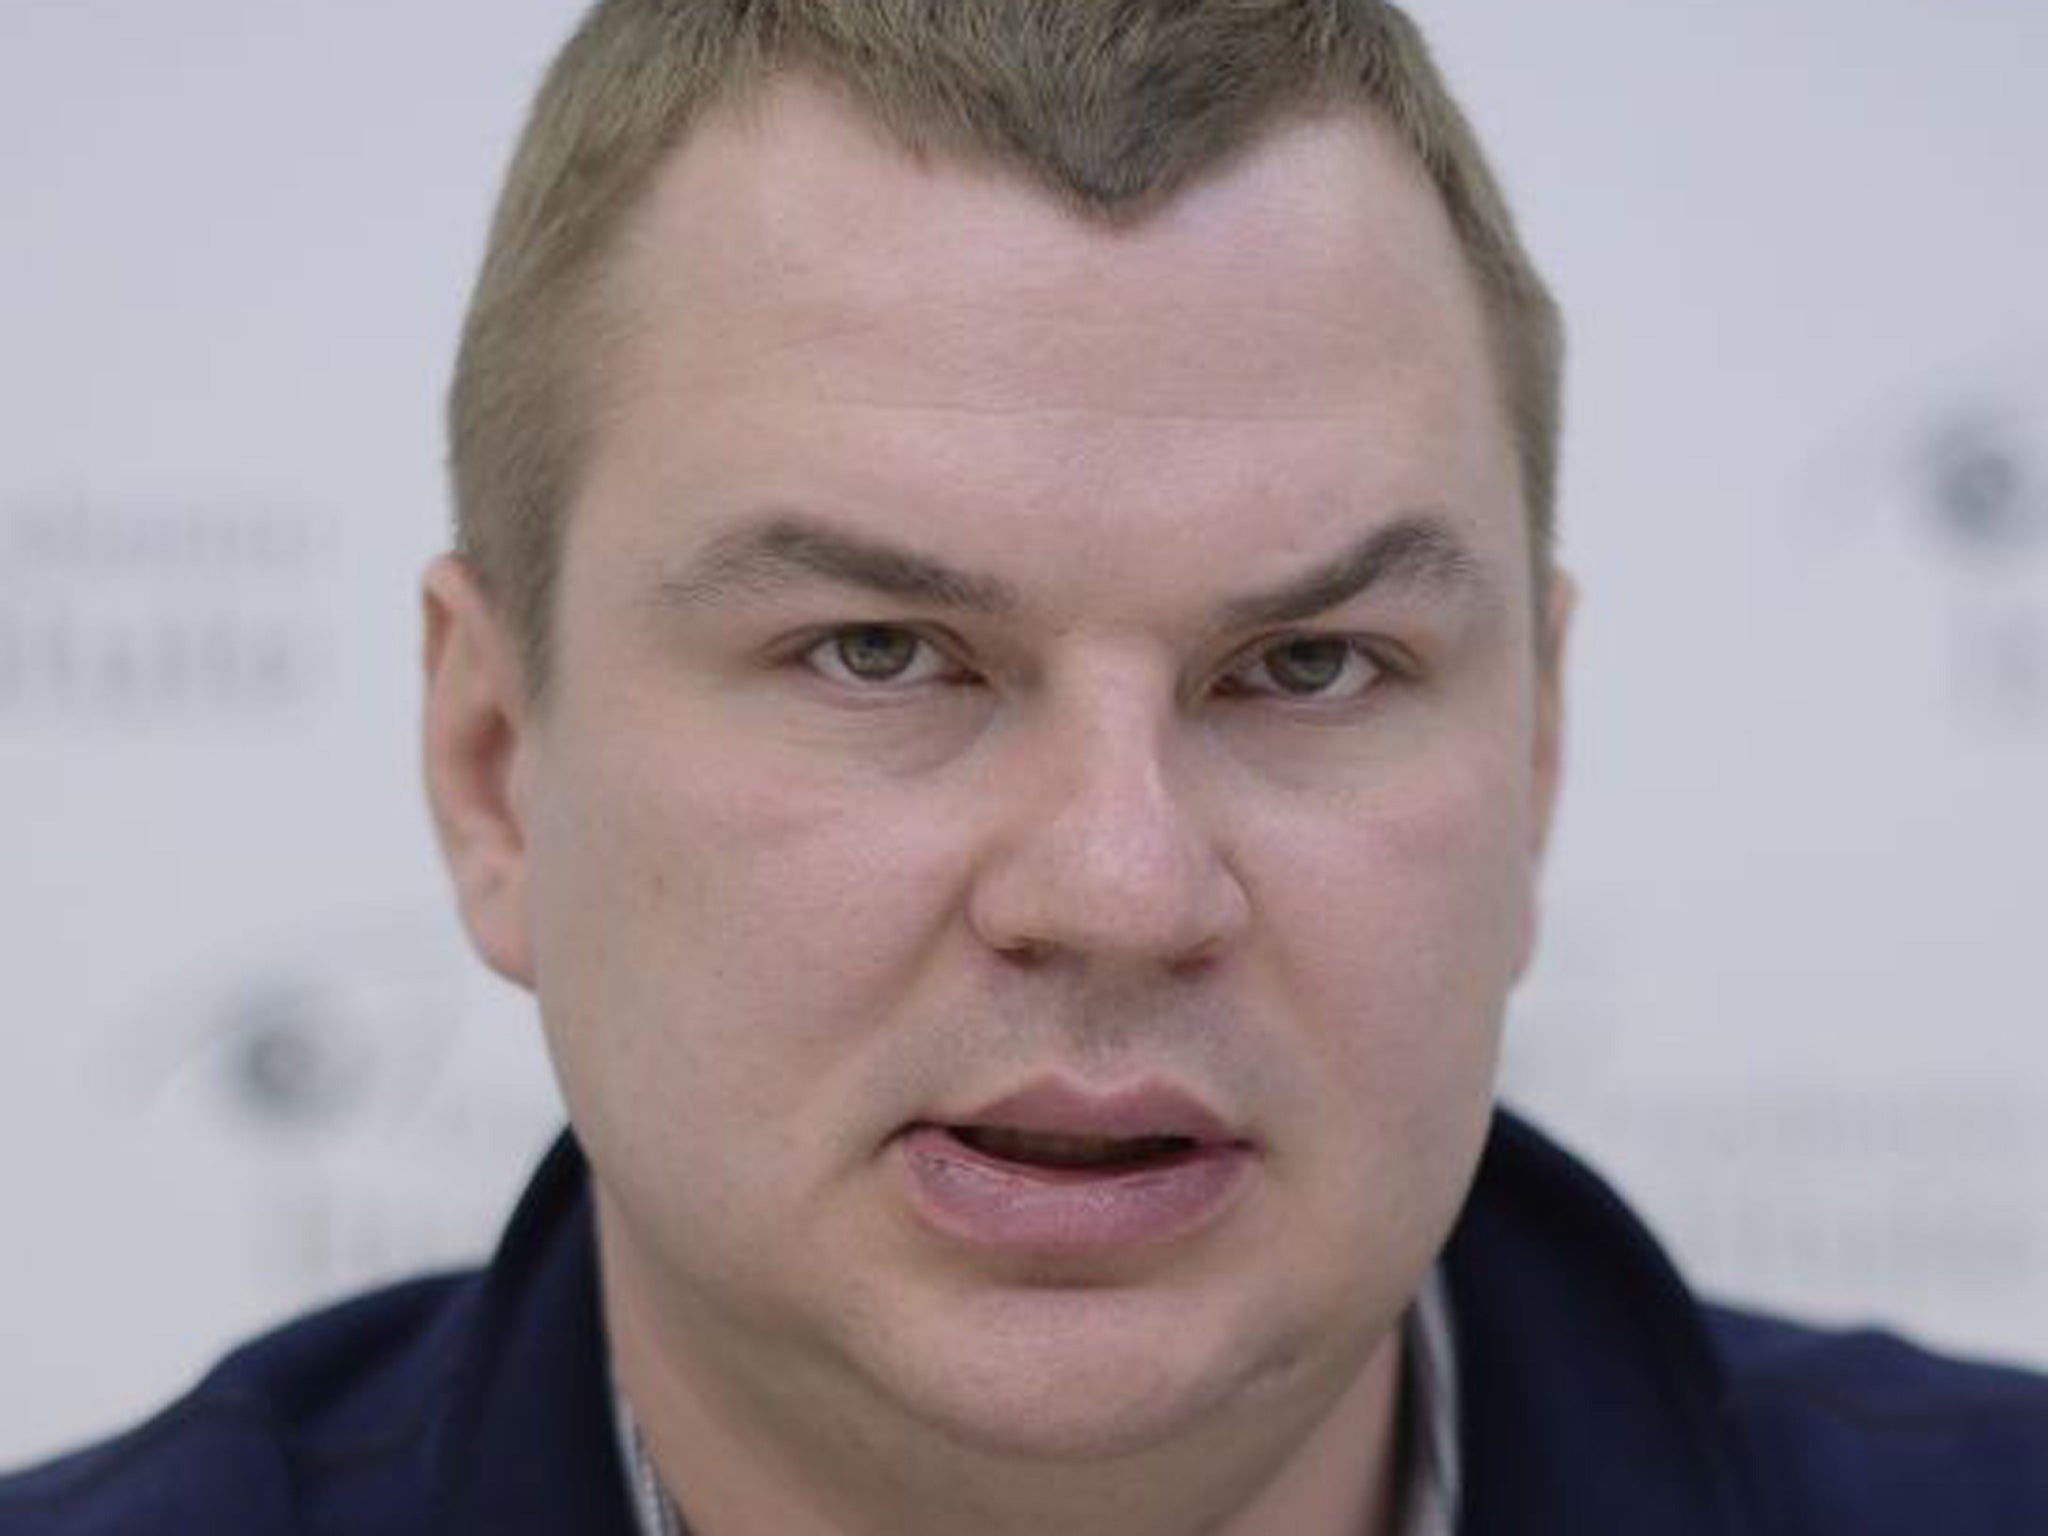 Dmytro Bulatov,a Ukrainian opposition activist, says he was kidnapped and tortured